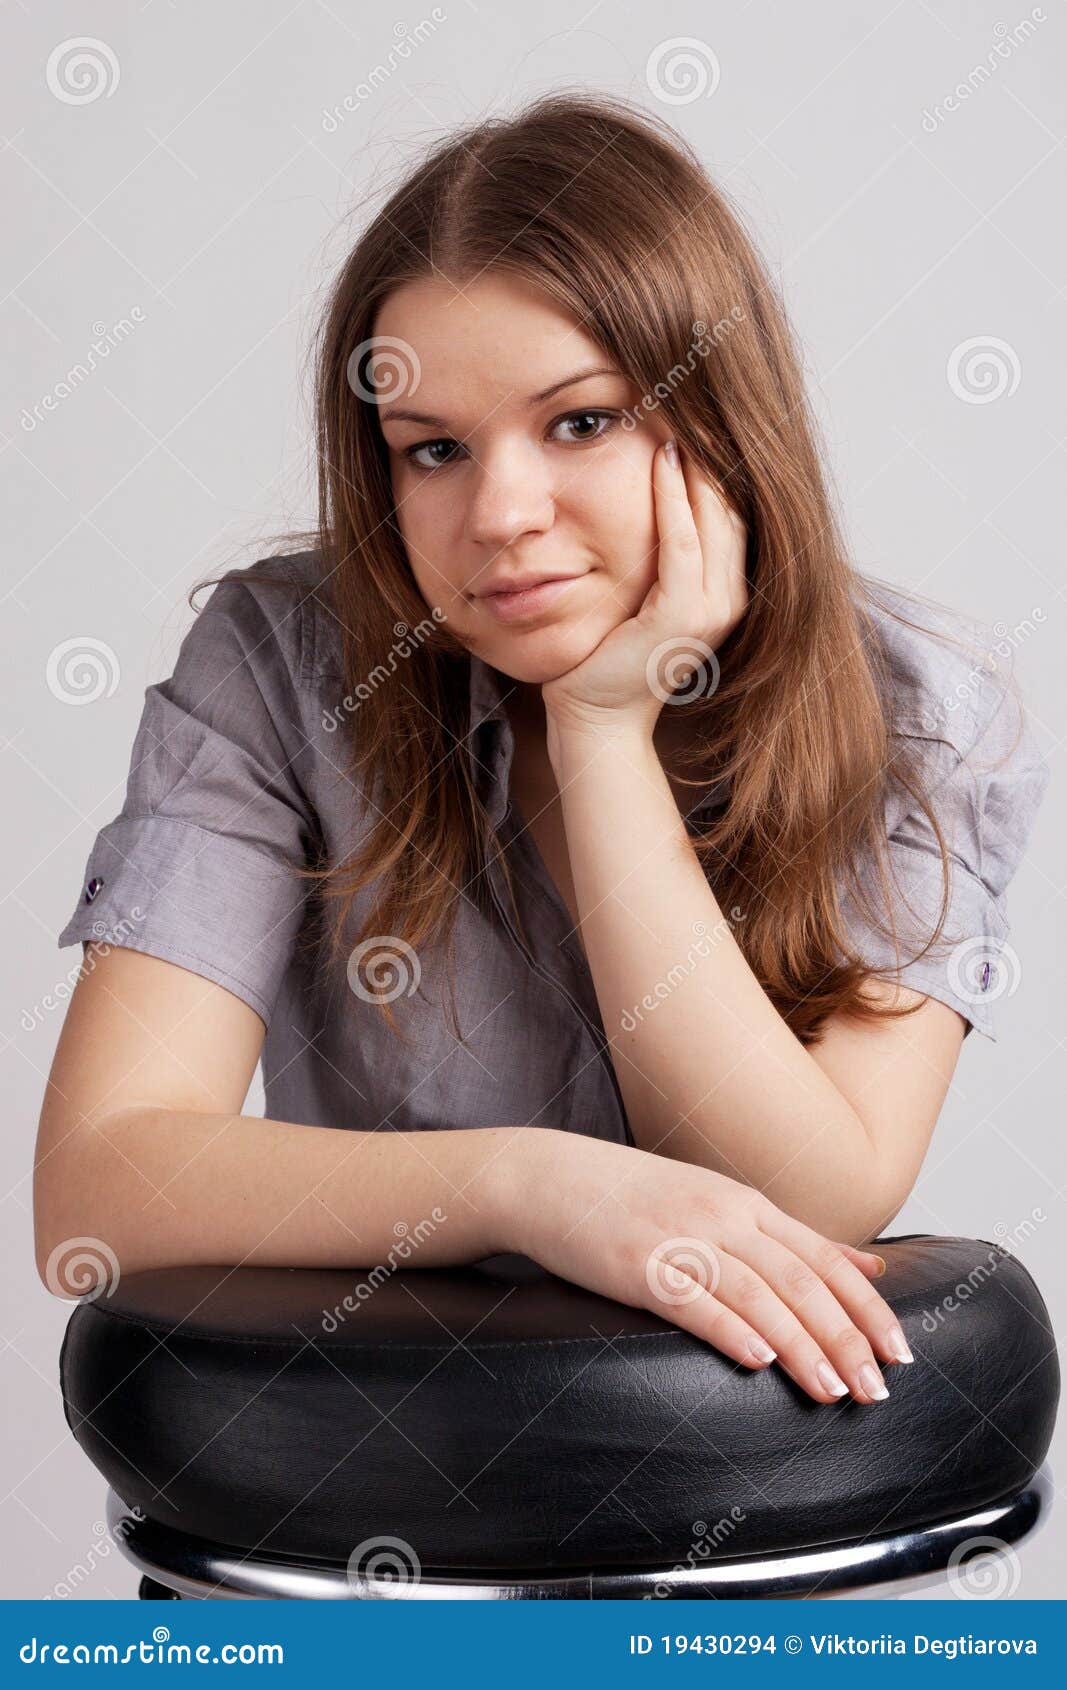 A girl in a gray shirt stock photo. Image of white, teenager - 19430294